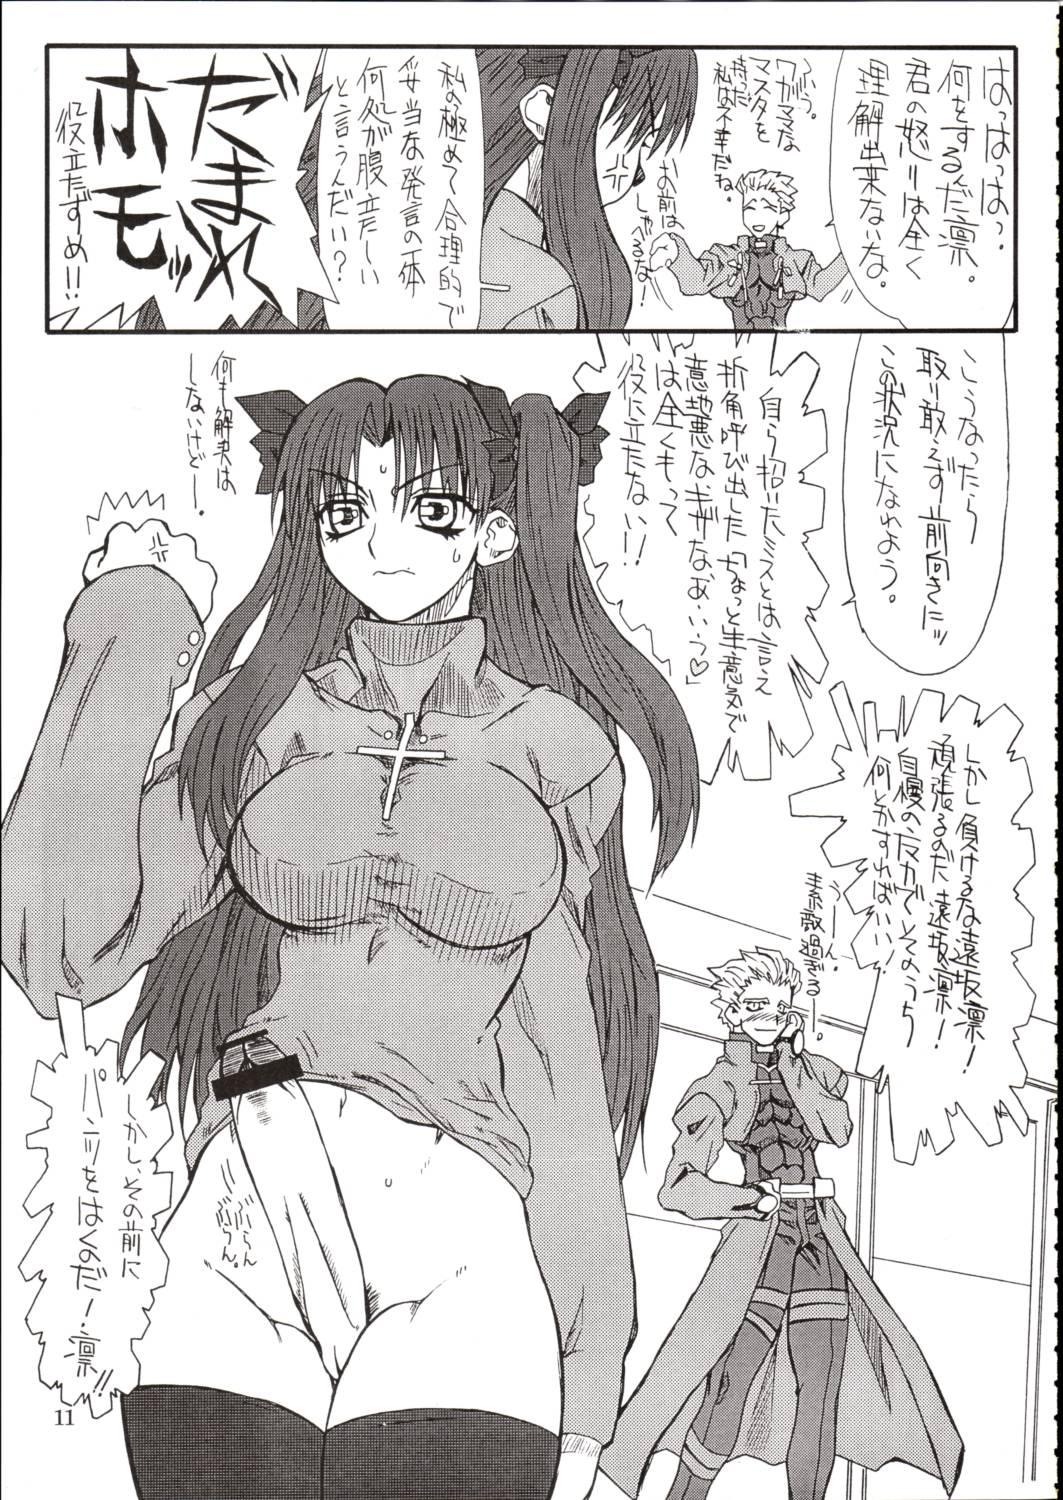 Girl Azuki Been - Fate stay night Big breasts - Page 10